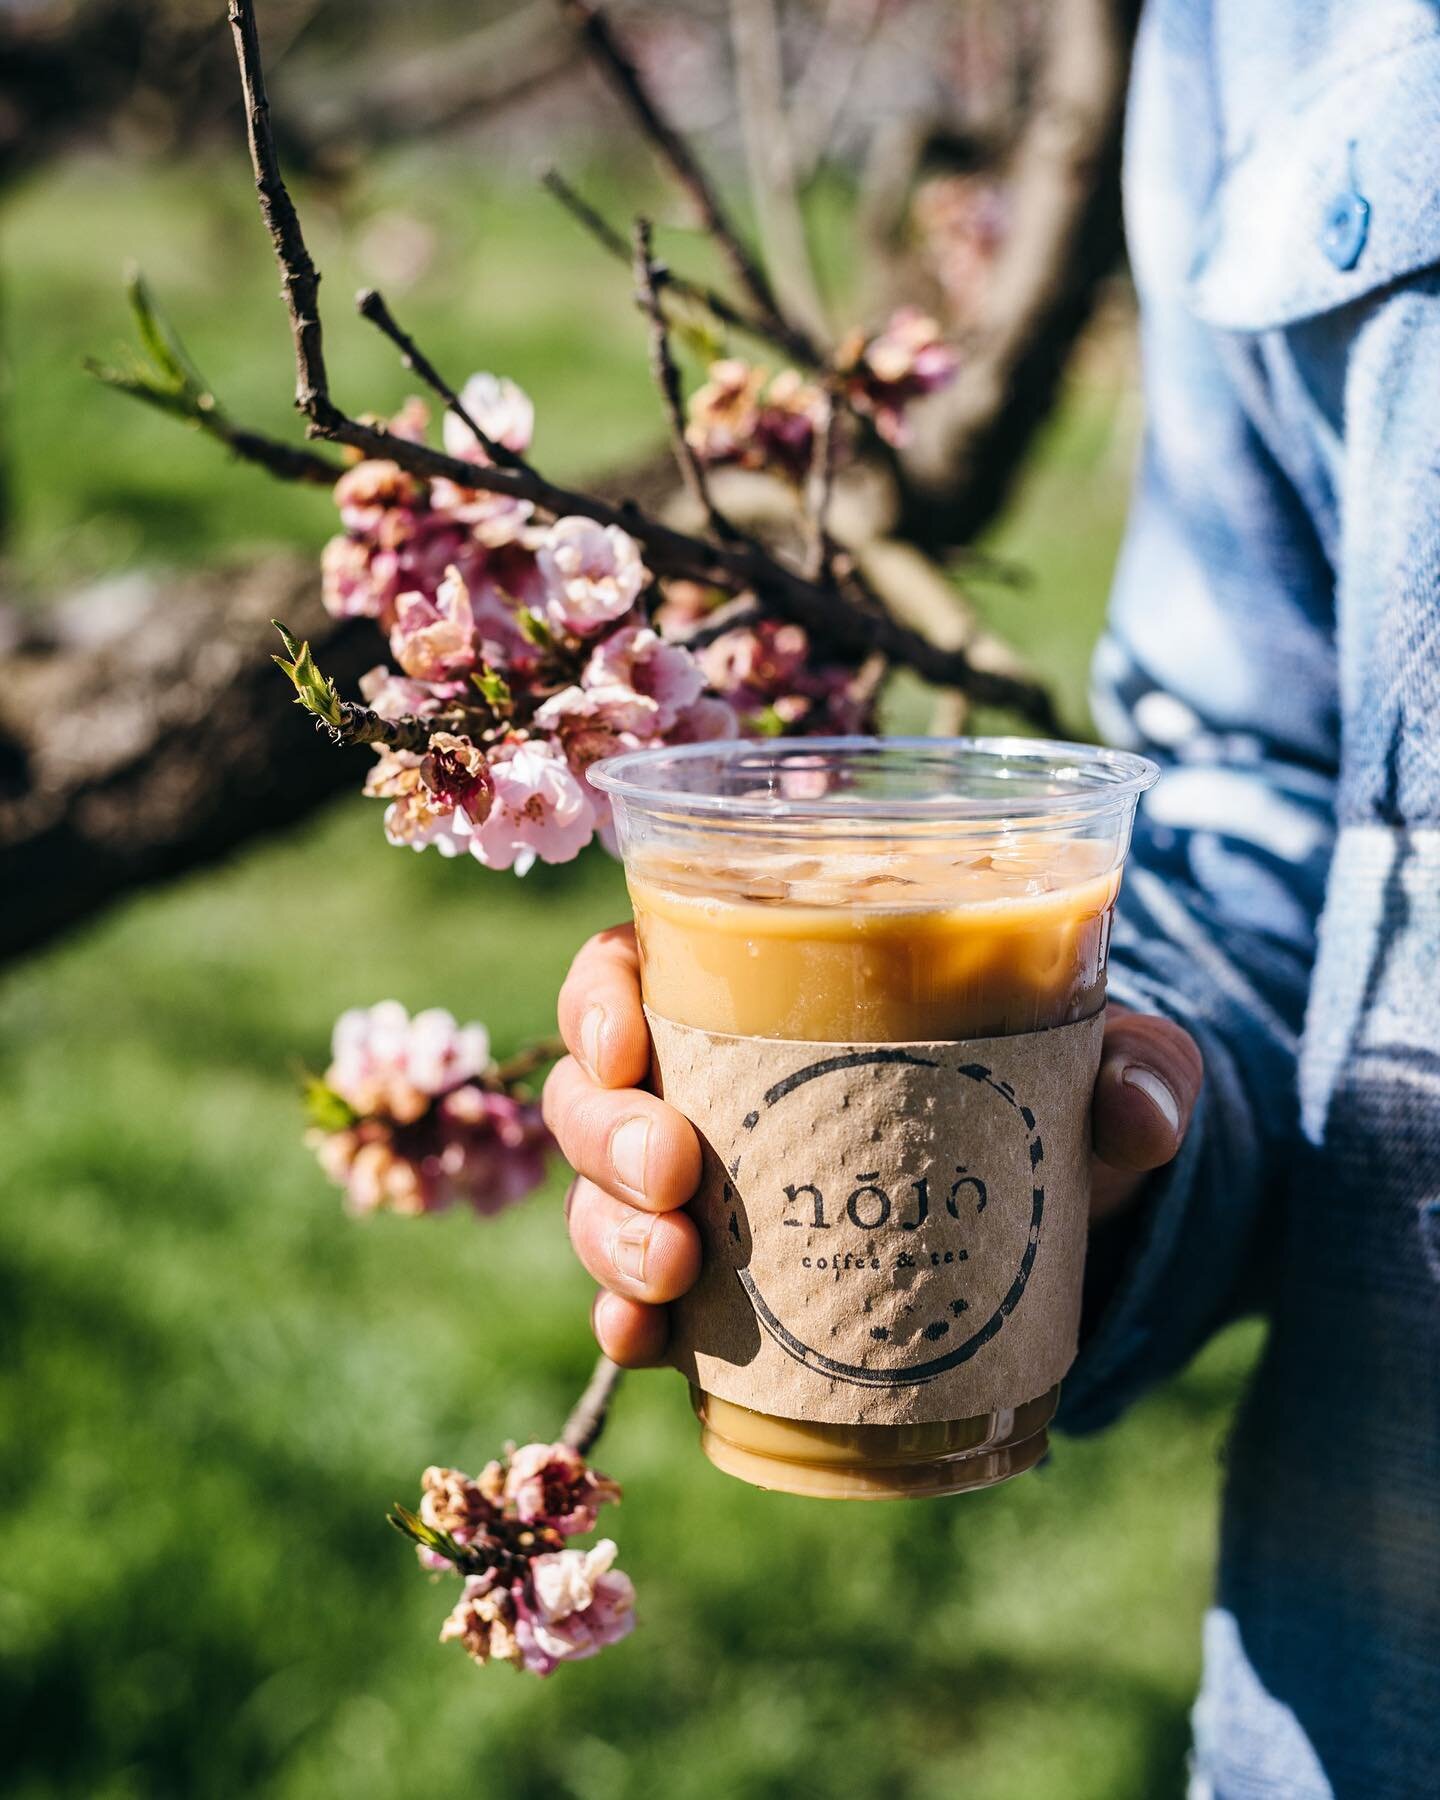 Spring is in the air at @chinofarms with @hellonojo coffee in hand. Check them out in Rancho Santa Fe.